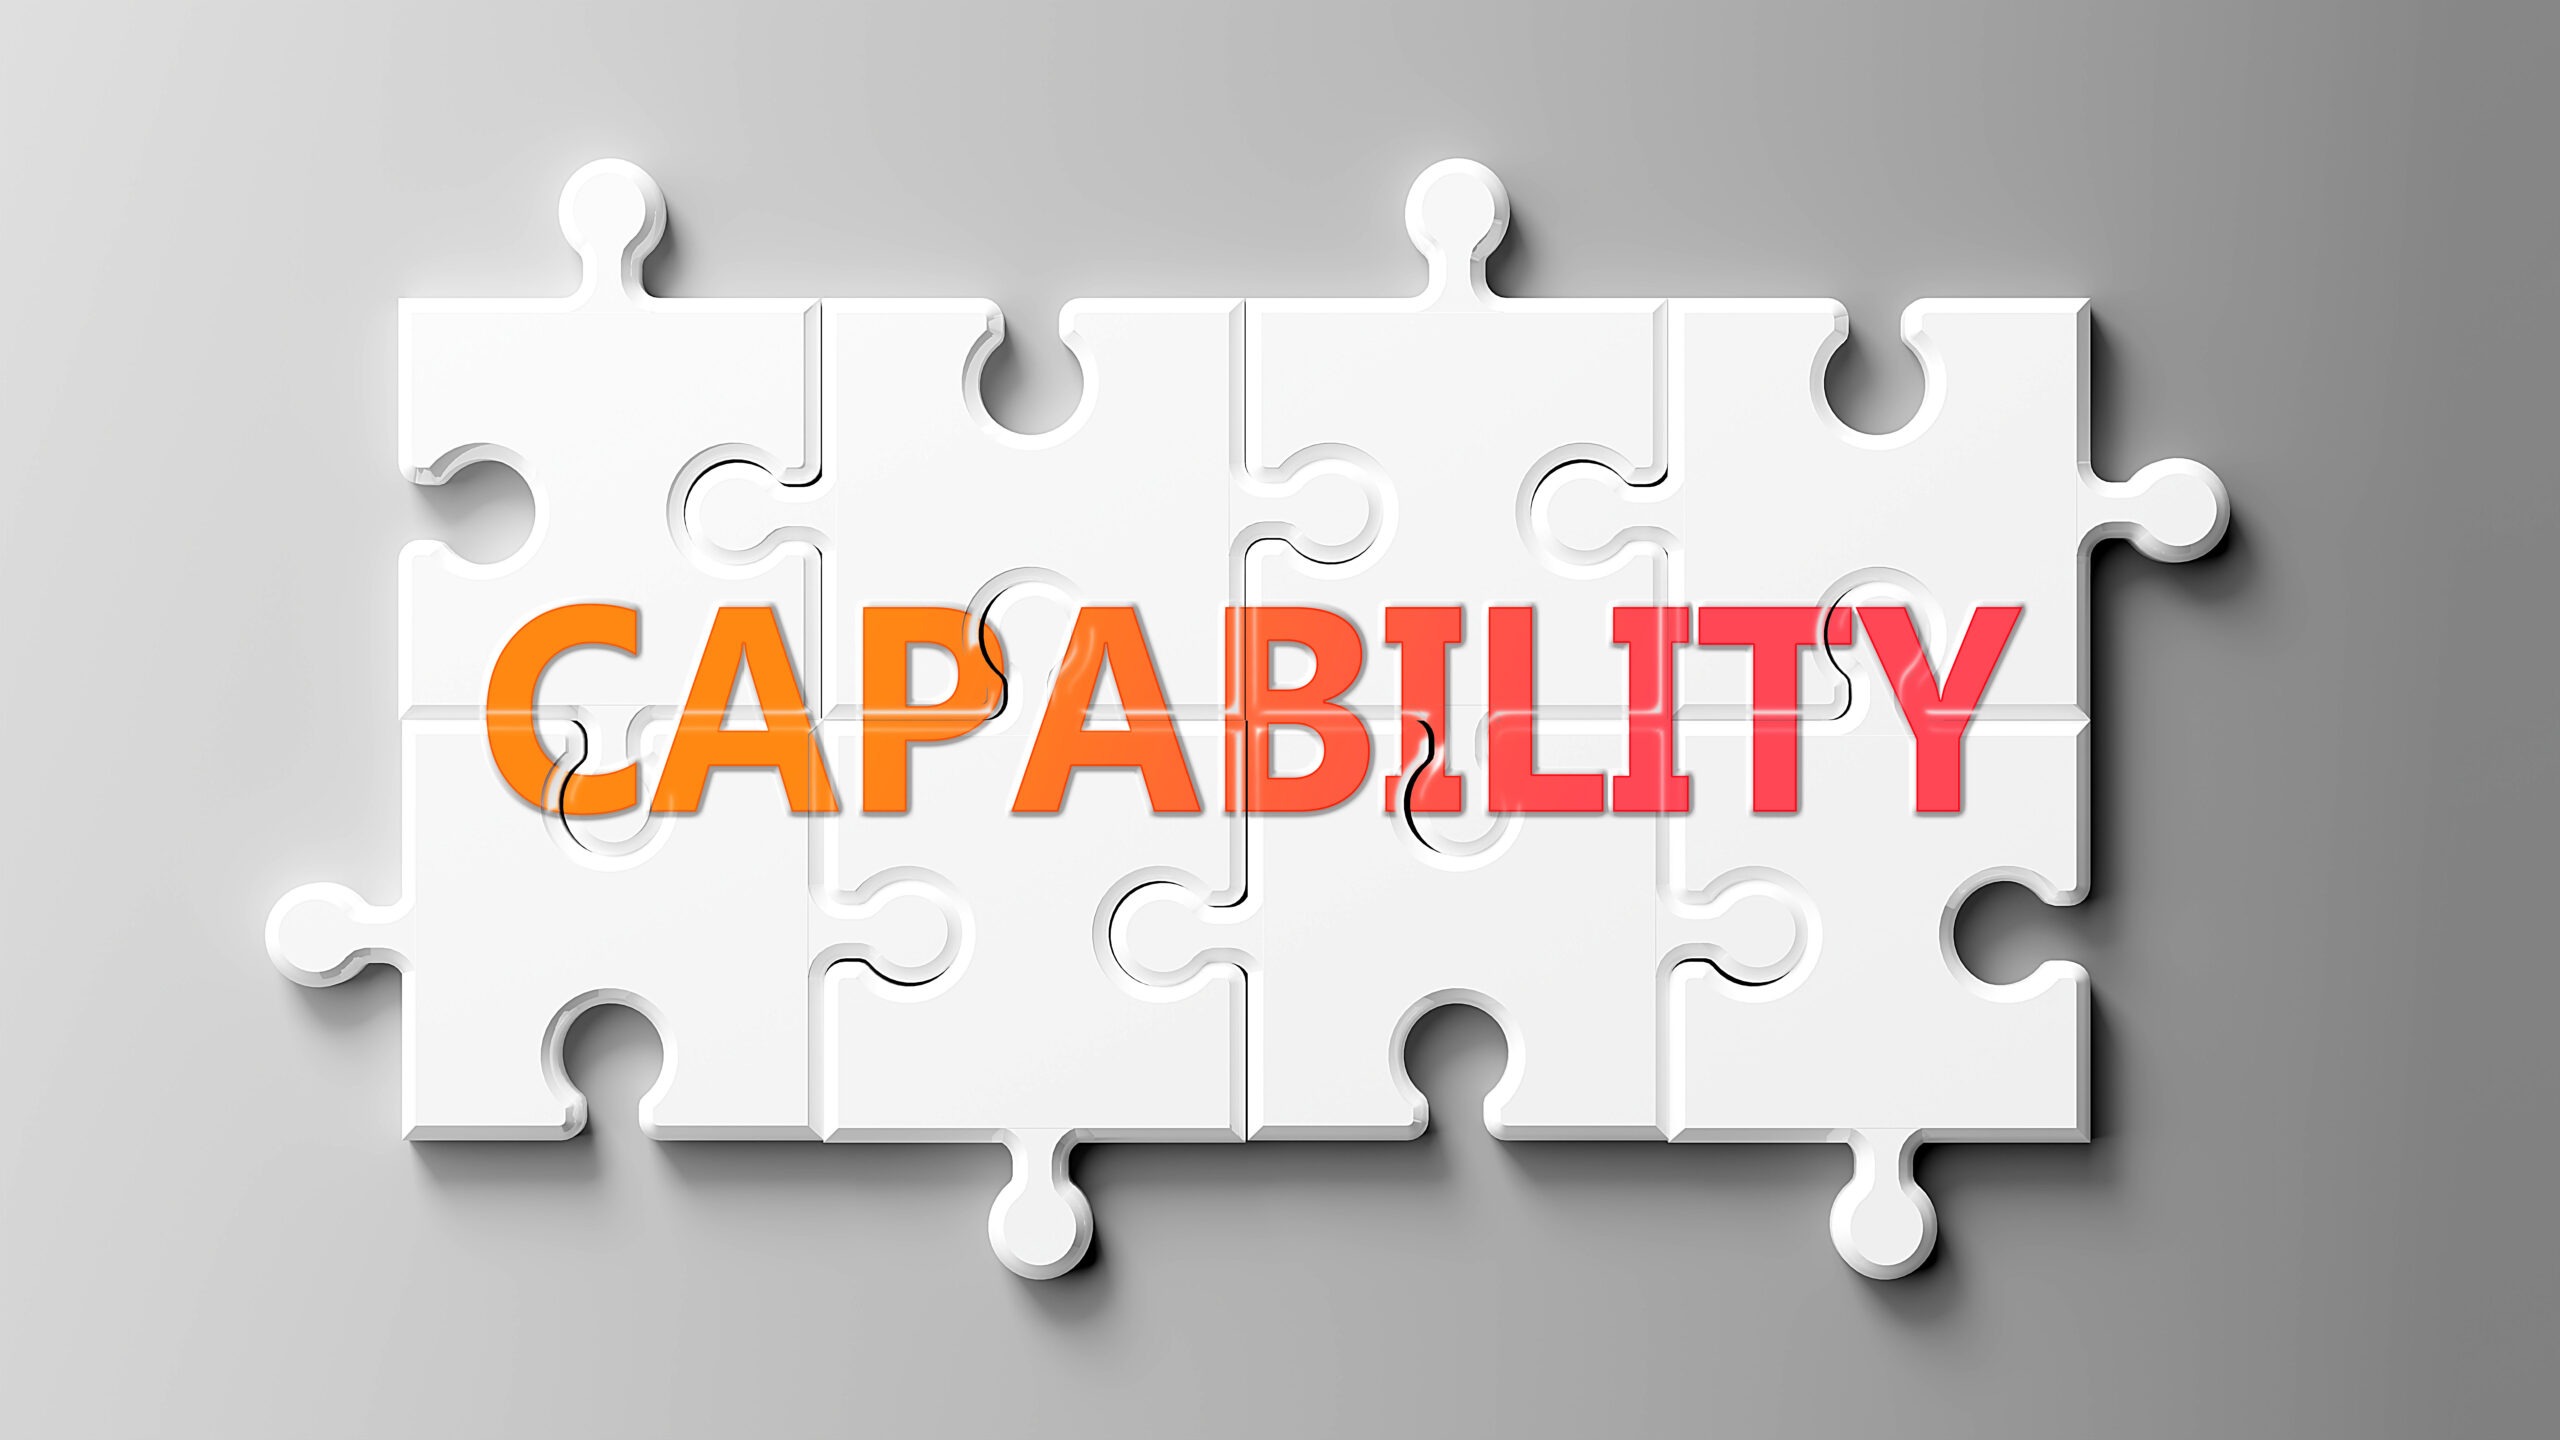 The word "capability" is written in orange and pink across several white puzzle pieces. An ICF Master Certified Coach has many capabilities and experiences that are relevant to their clients.